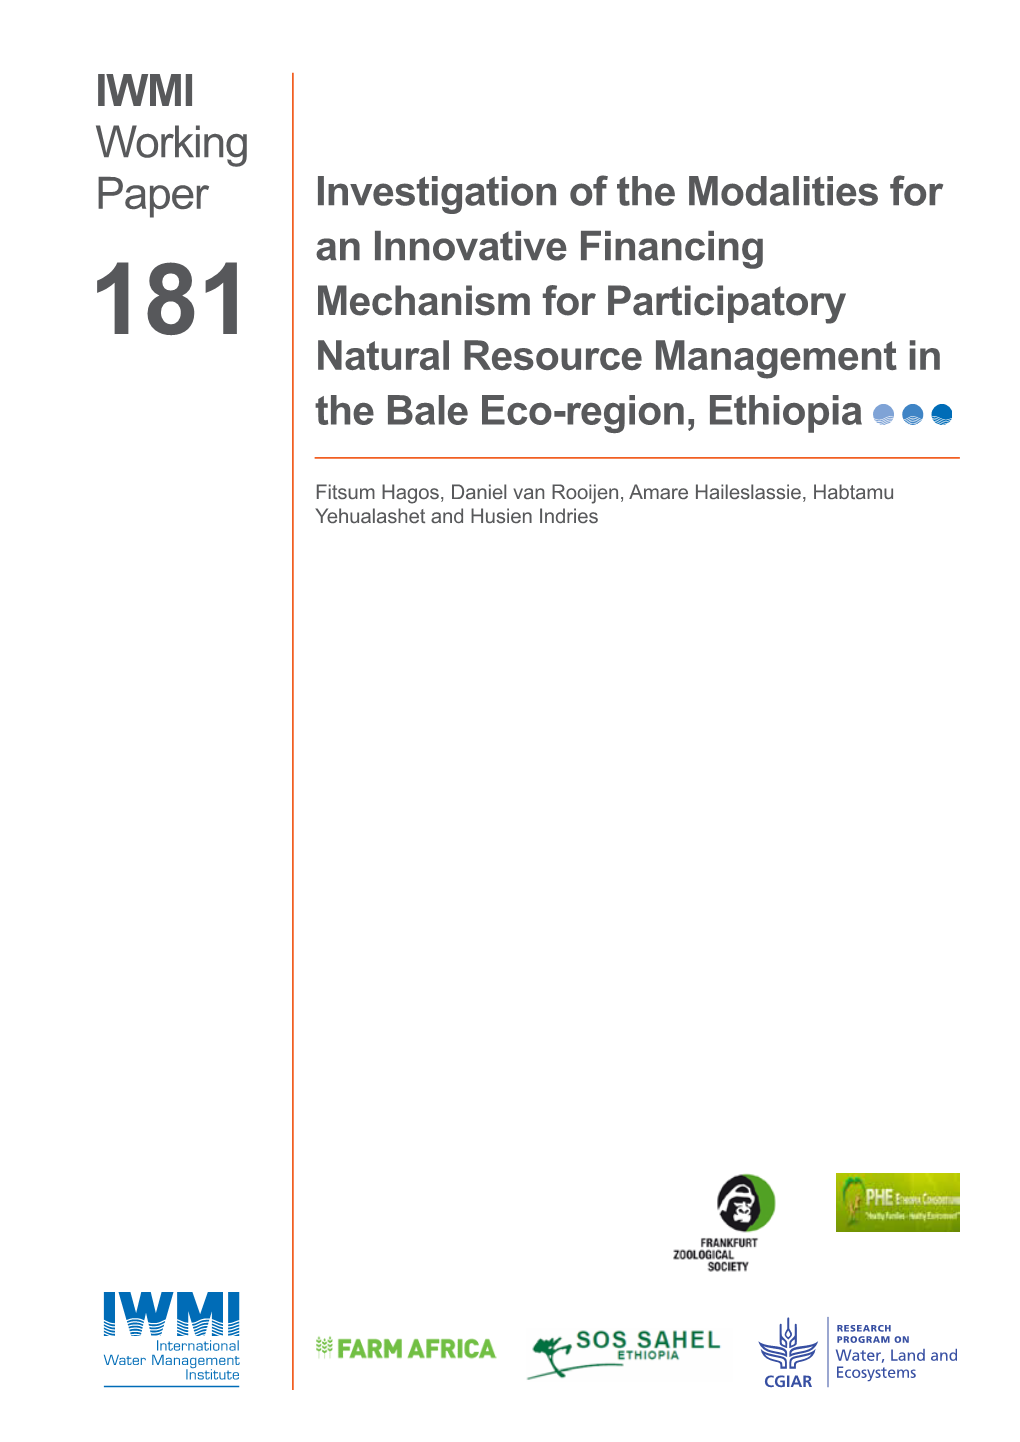 Investigation of the Modalities for an Innovative Financing Mechanism for Participatory 181 Natural Resource Management in the Bale Eco-Region, Ethiopia